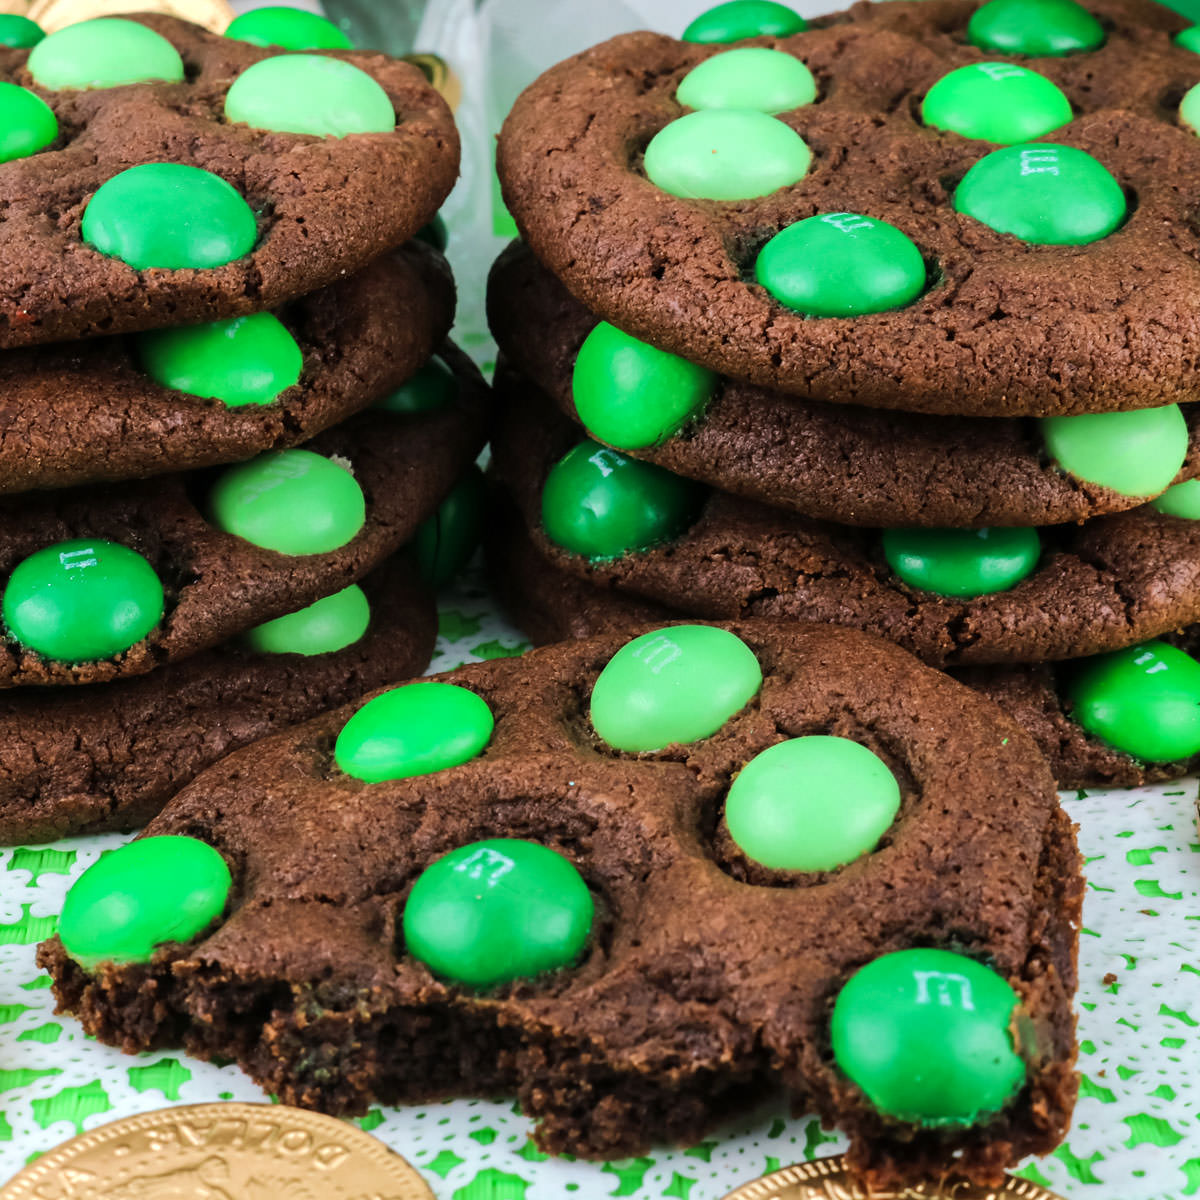 https://www.twosisterscrafting.com/wp-content/uploads/2017/02/st-patricks-day-mint-mm-cookies-featured-1.jpg